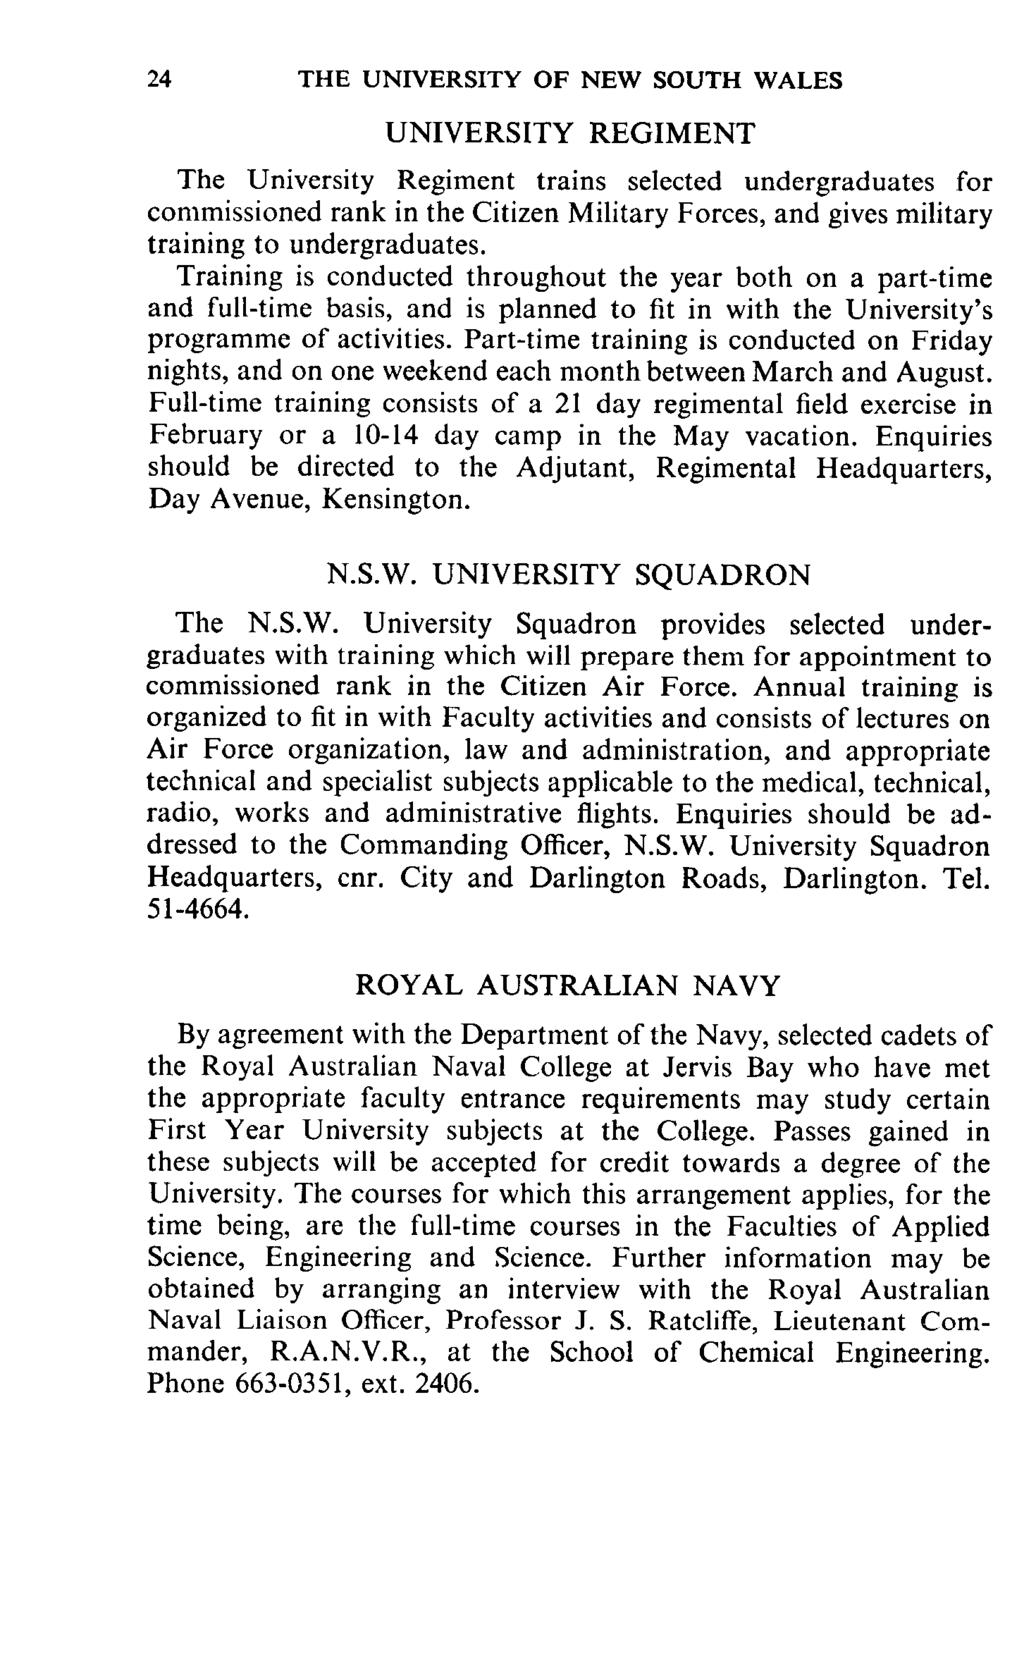 24 THE UNIVERSITY OF NEW SOUTH WALES UNIVERSITY REGIMENT The University Regiment trains selected undergraduates for commissioned rank in the Citizen Mihtary Forces, and gives military training to